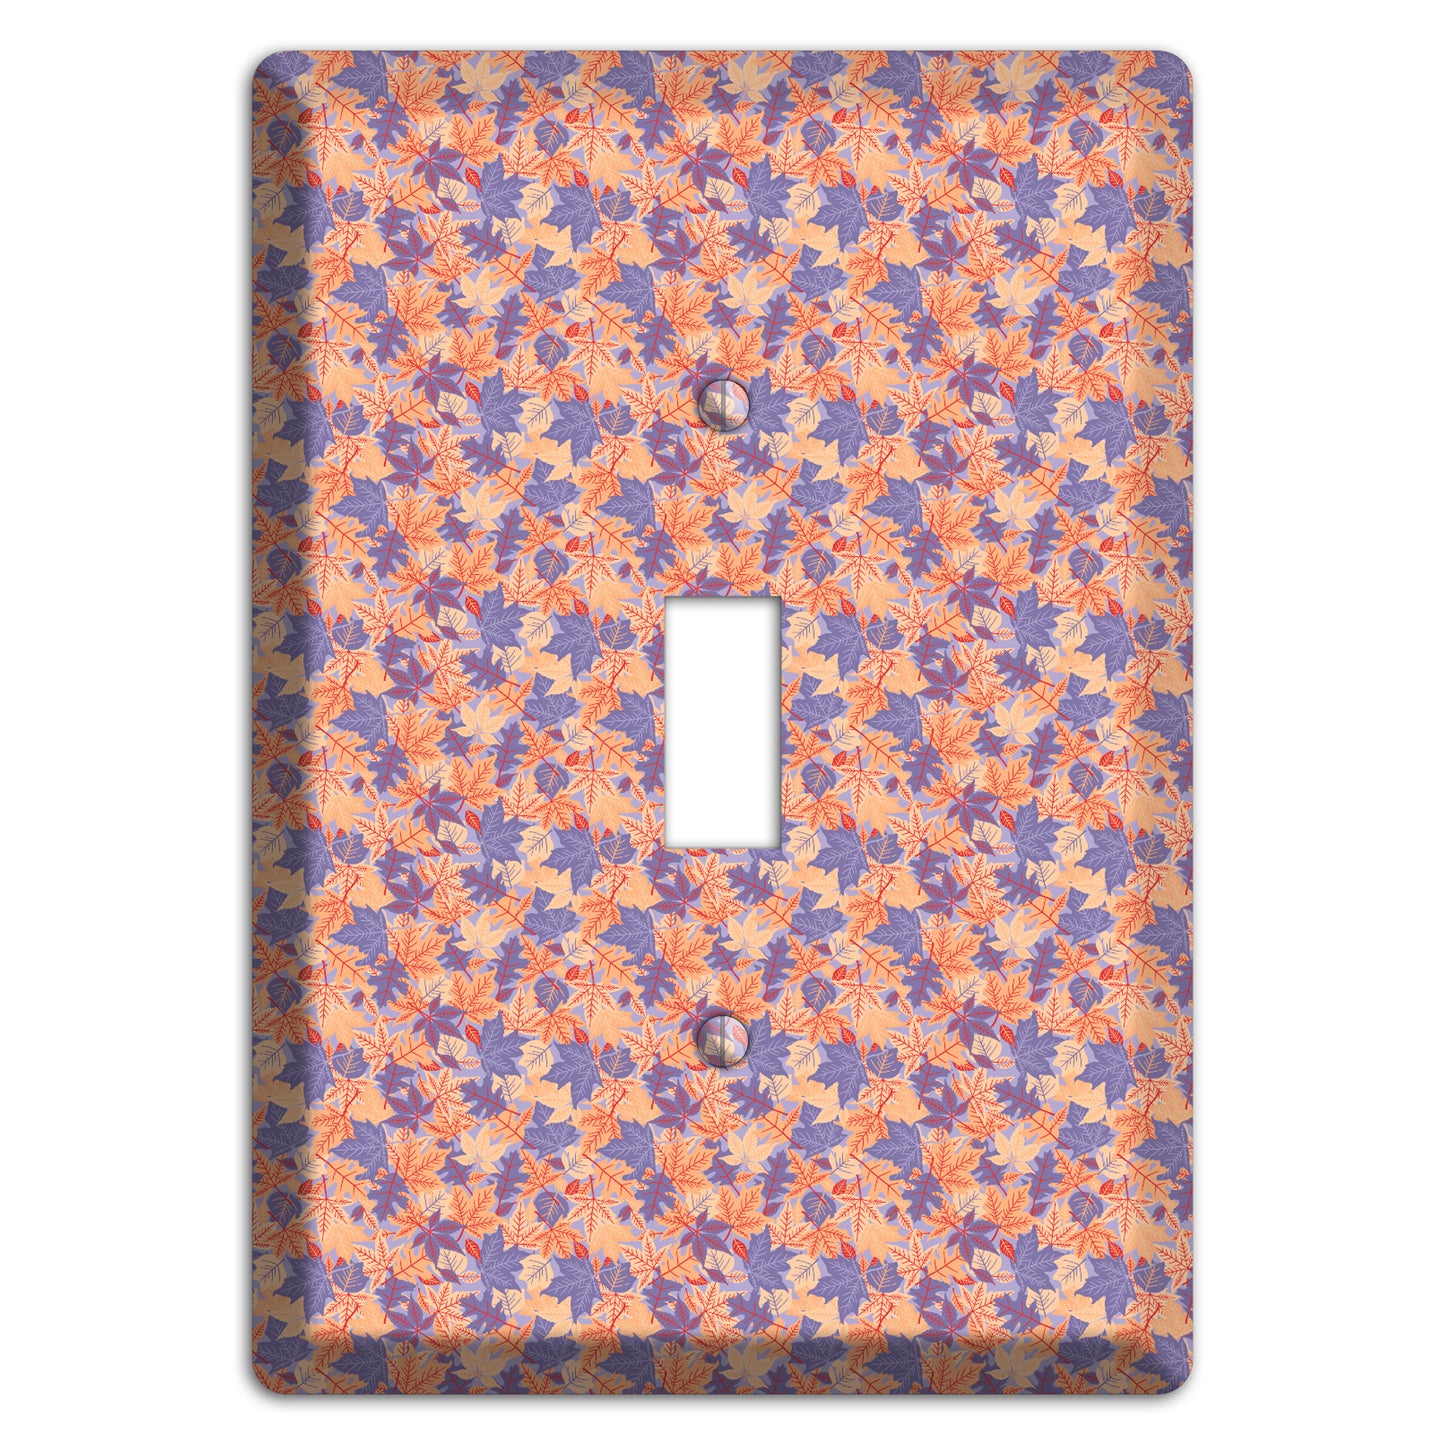 Autumn Leaves Overlay Cover Plates